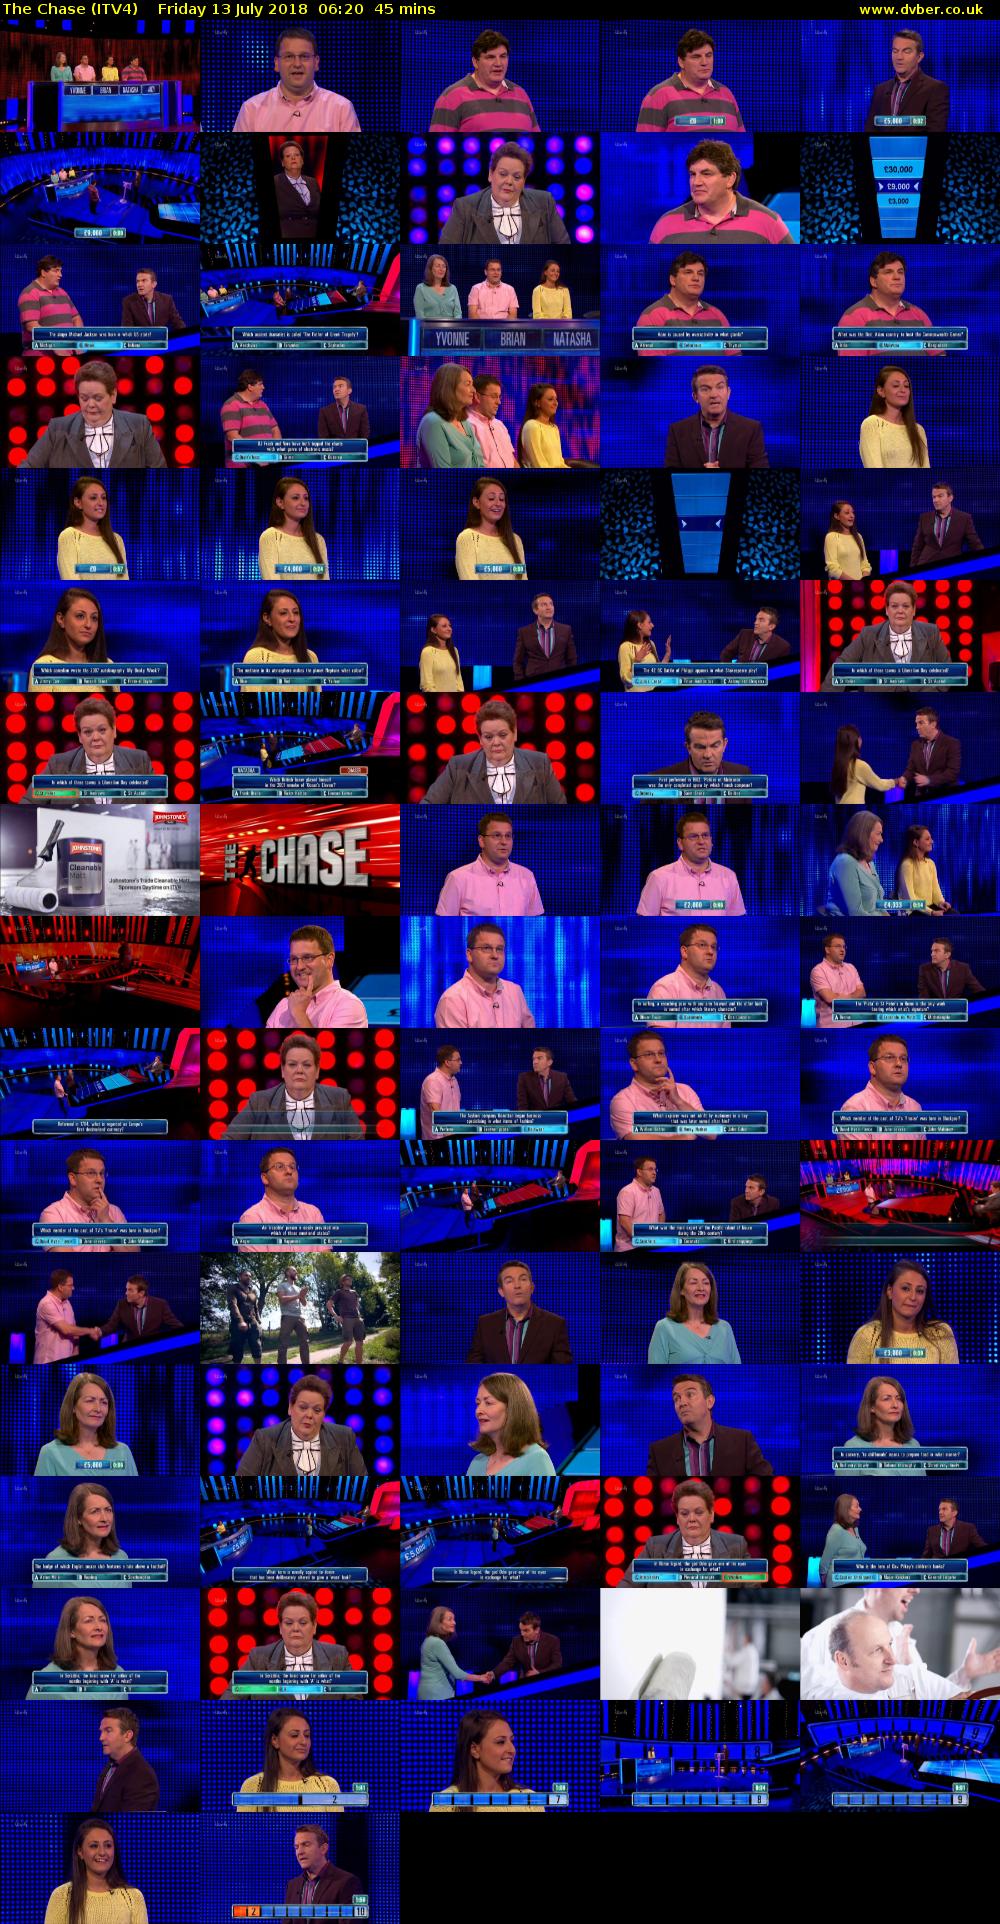 The Chase (ITV4) Friday 13 July 2018 06:20 - 07:05